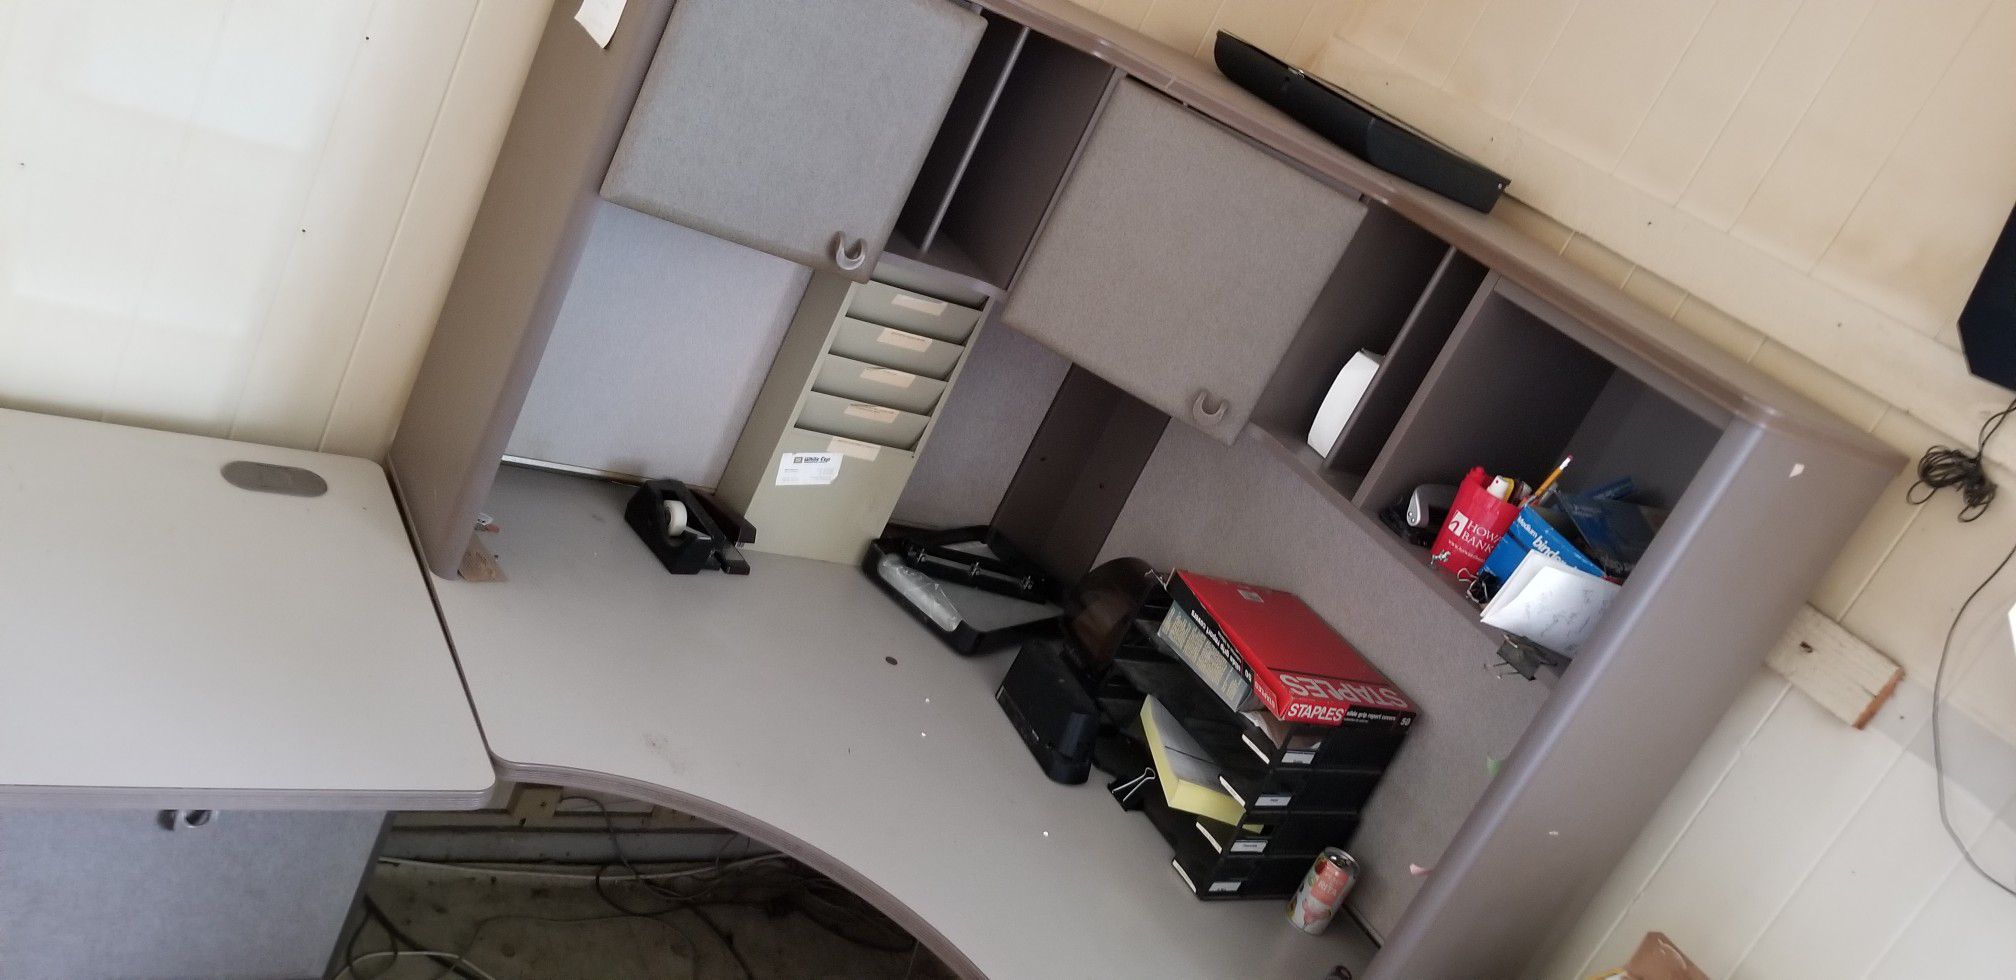 GREY OFFICE DESKS AND FILE CABINETS